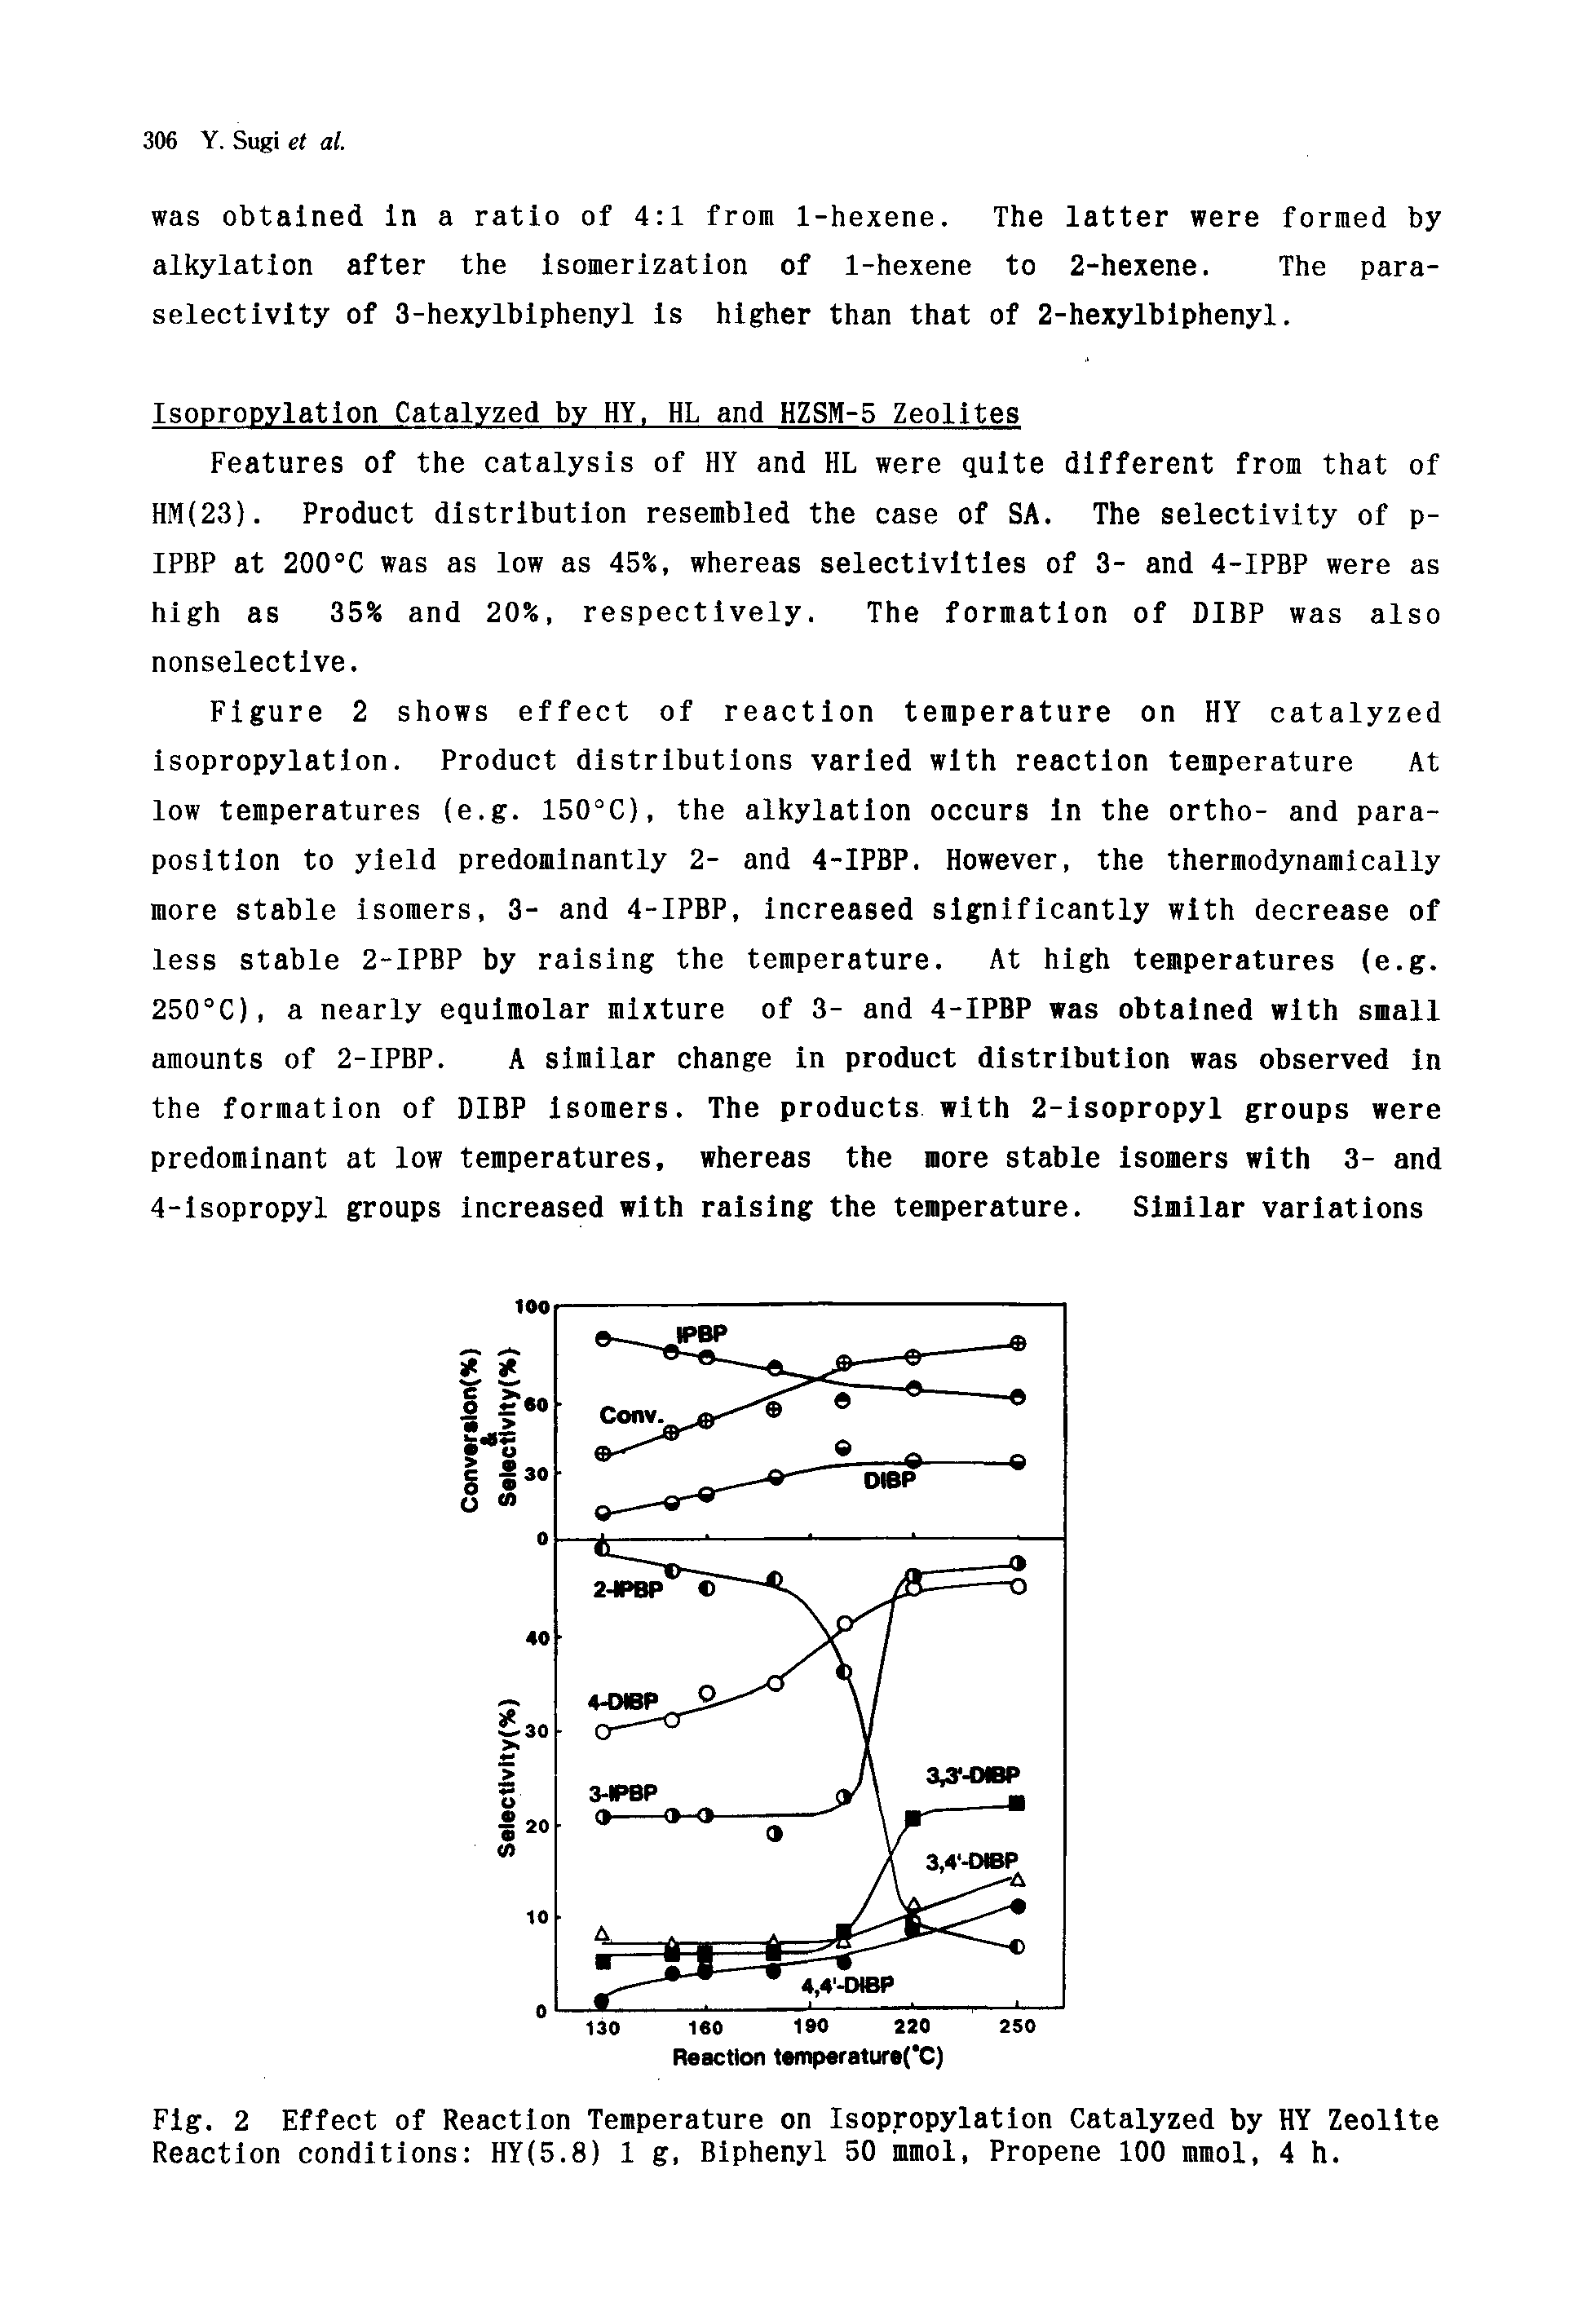 Fig. 2 Effect of Reaction Temperature on Isopropylation Catalyzed by HY Zeolite Reaction conditions HY(5.8) 1 g. Biphenyl 50 mmol, Propene 100 mmol, 4 h.